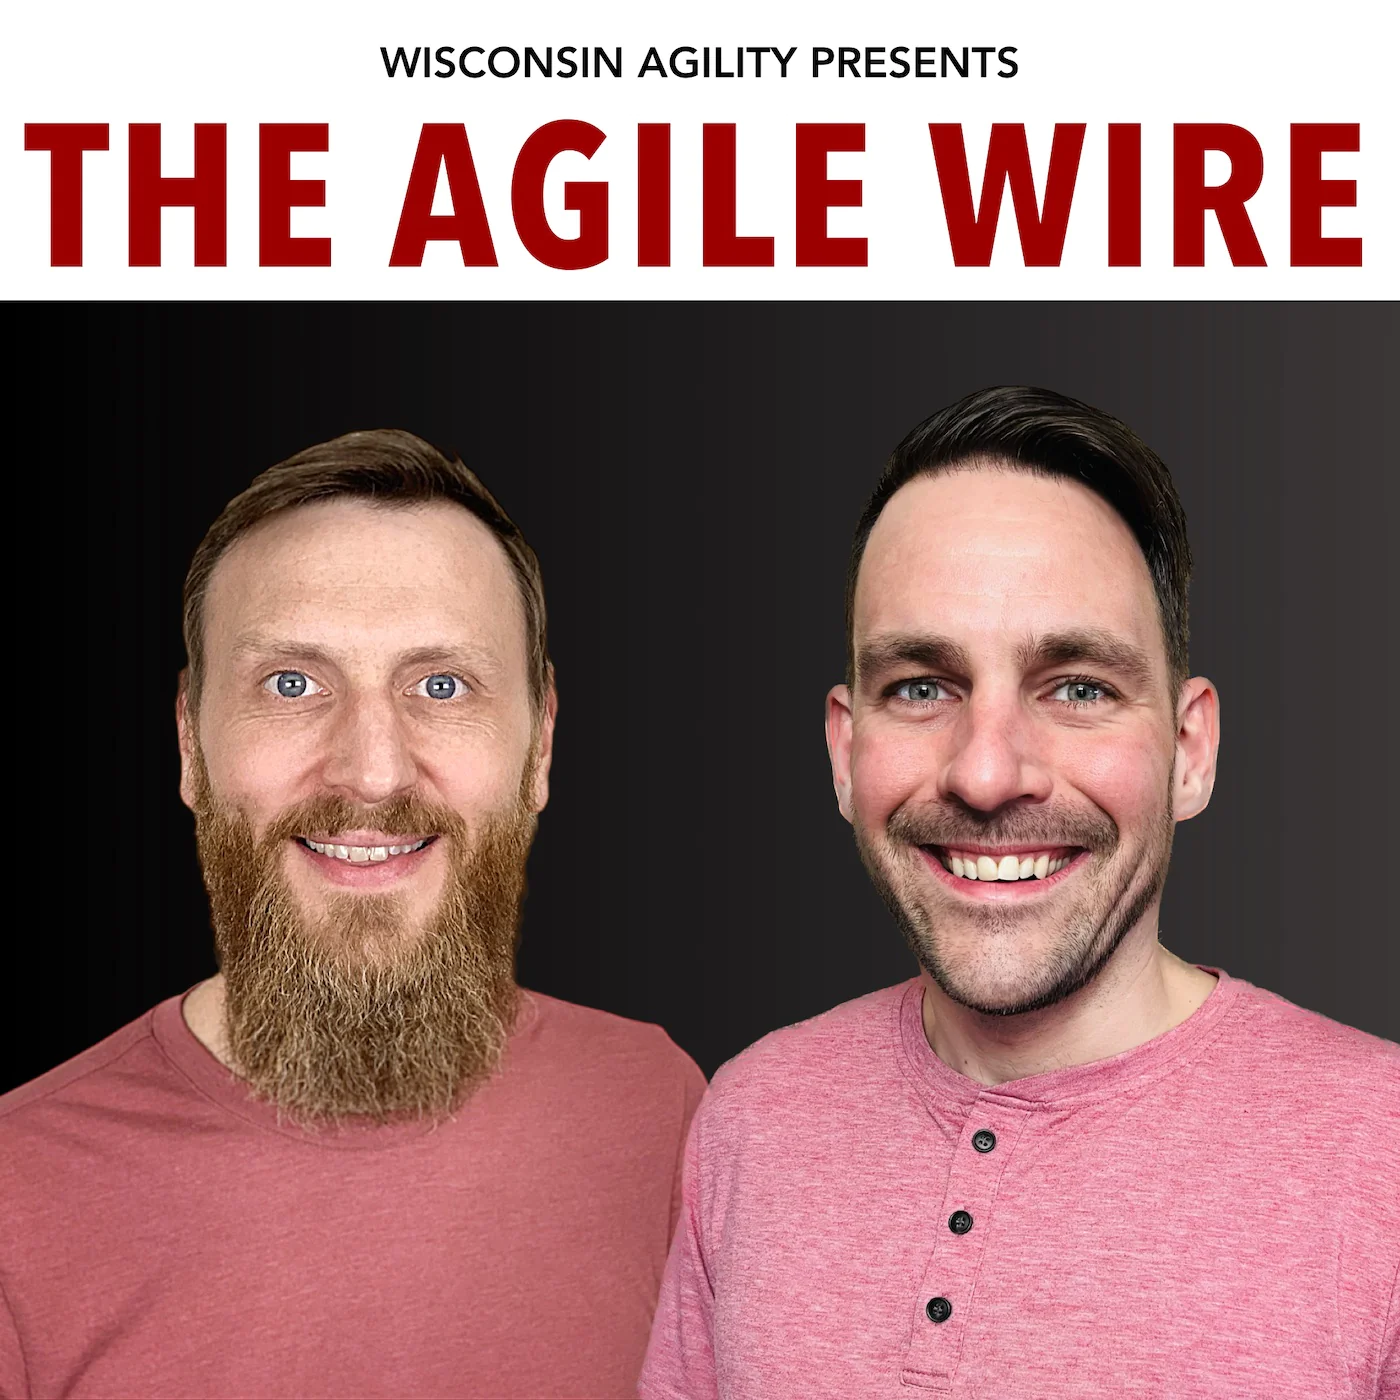 The Agile Wire Podcast with Jeff Bubolz & Chad Beier